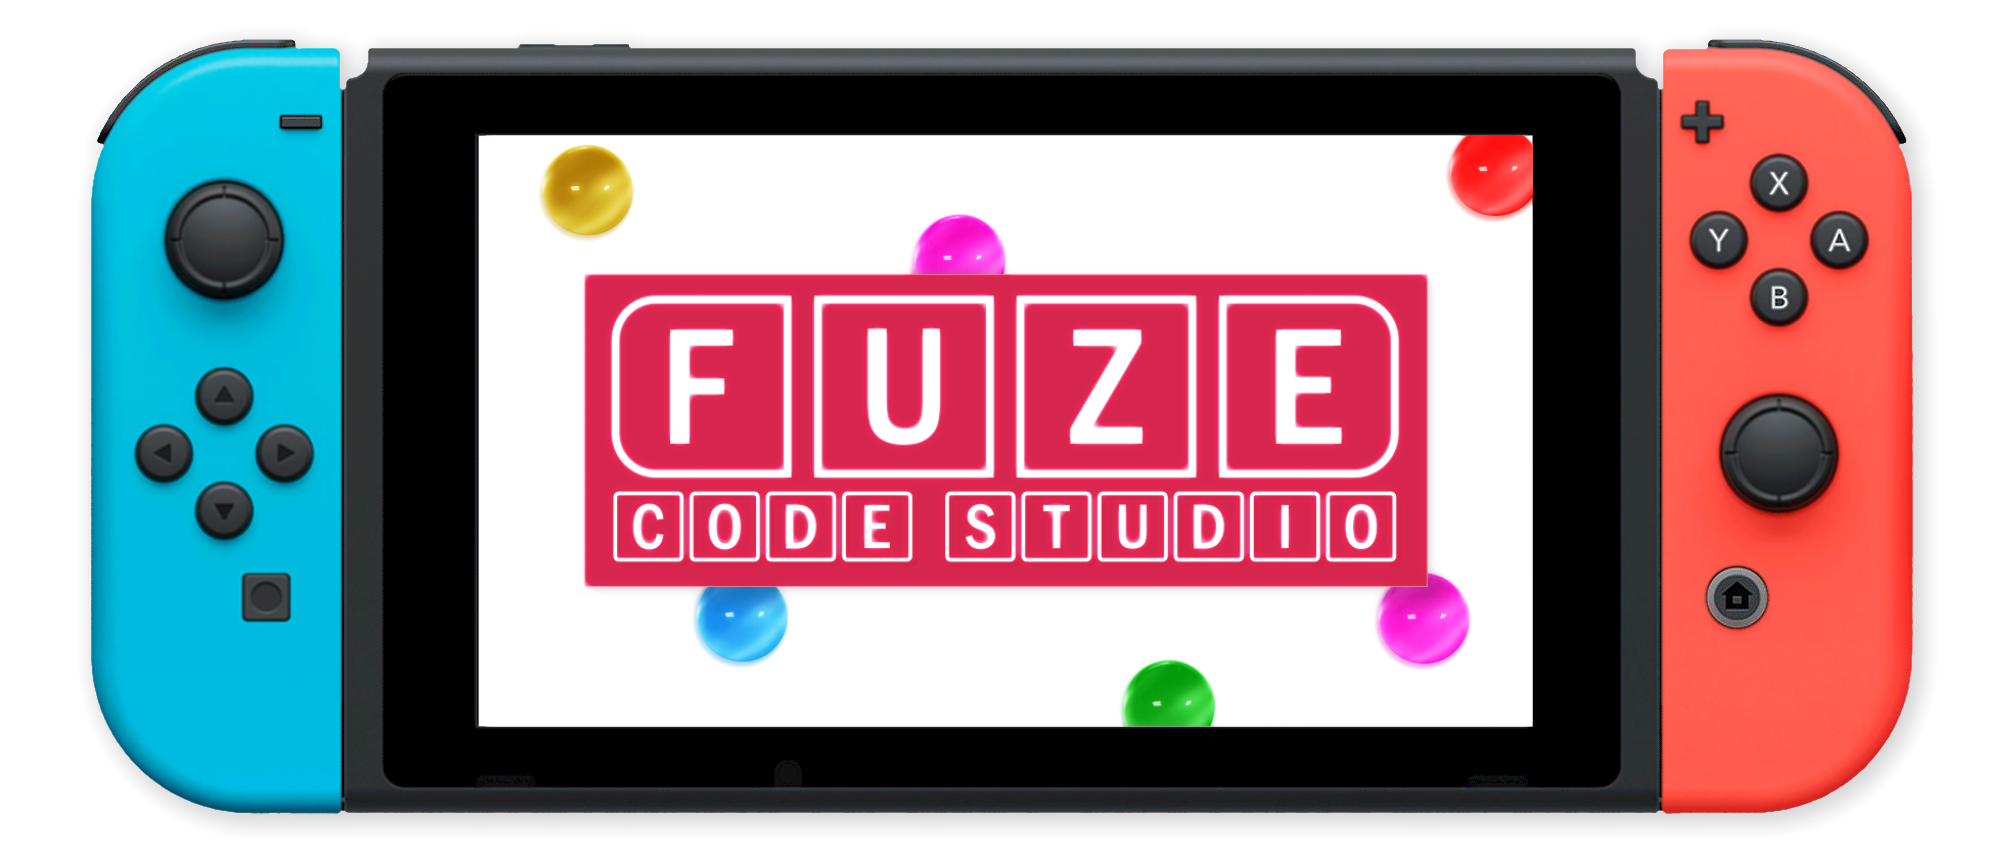 FUZE Player for Nintendo Switch - Nintendo Official Site